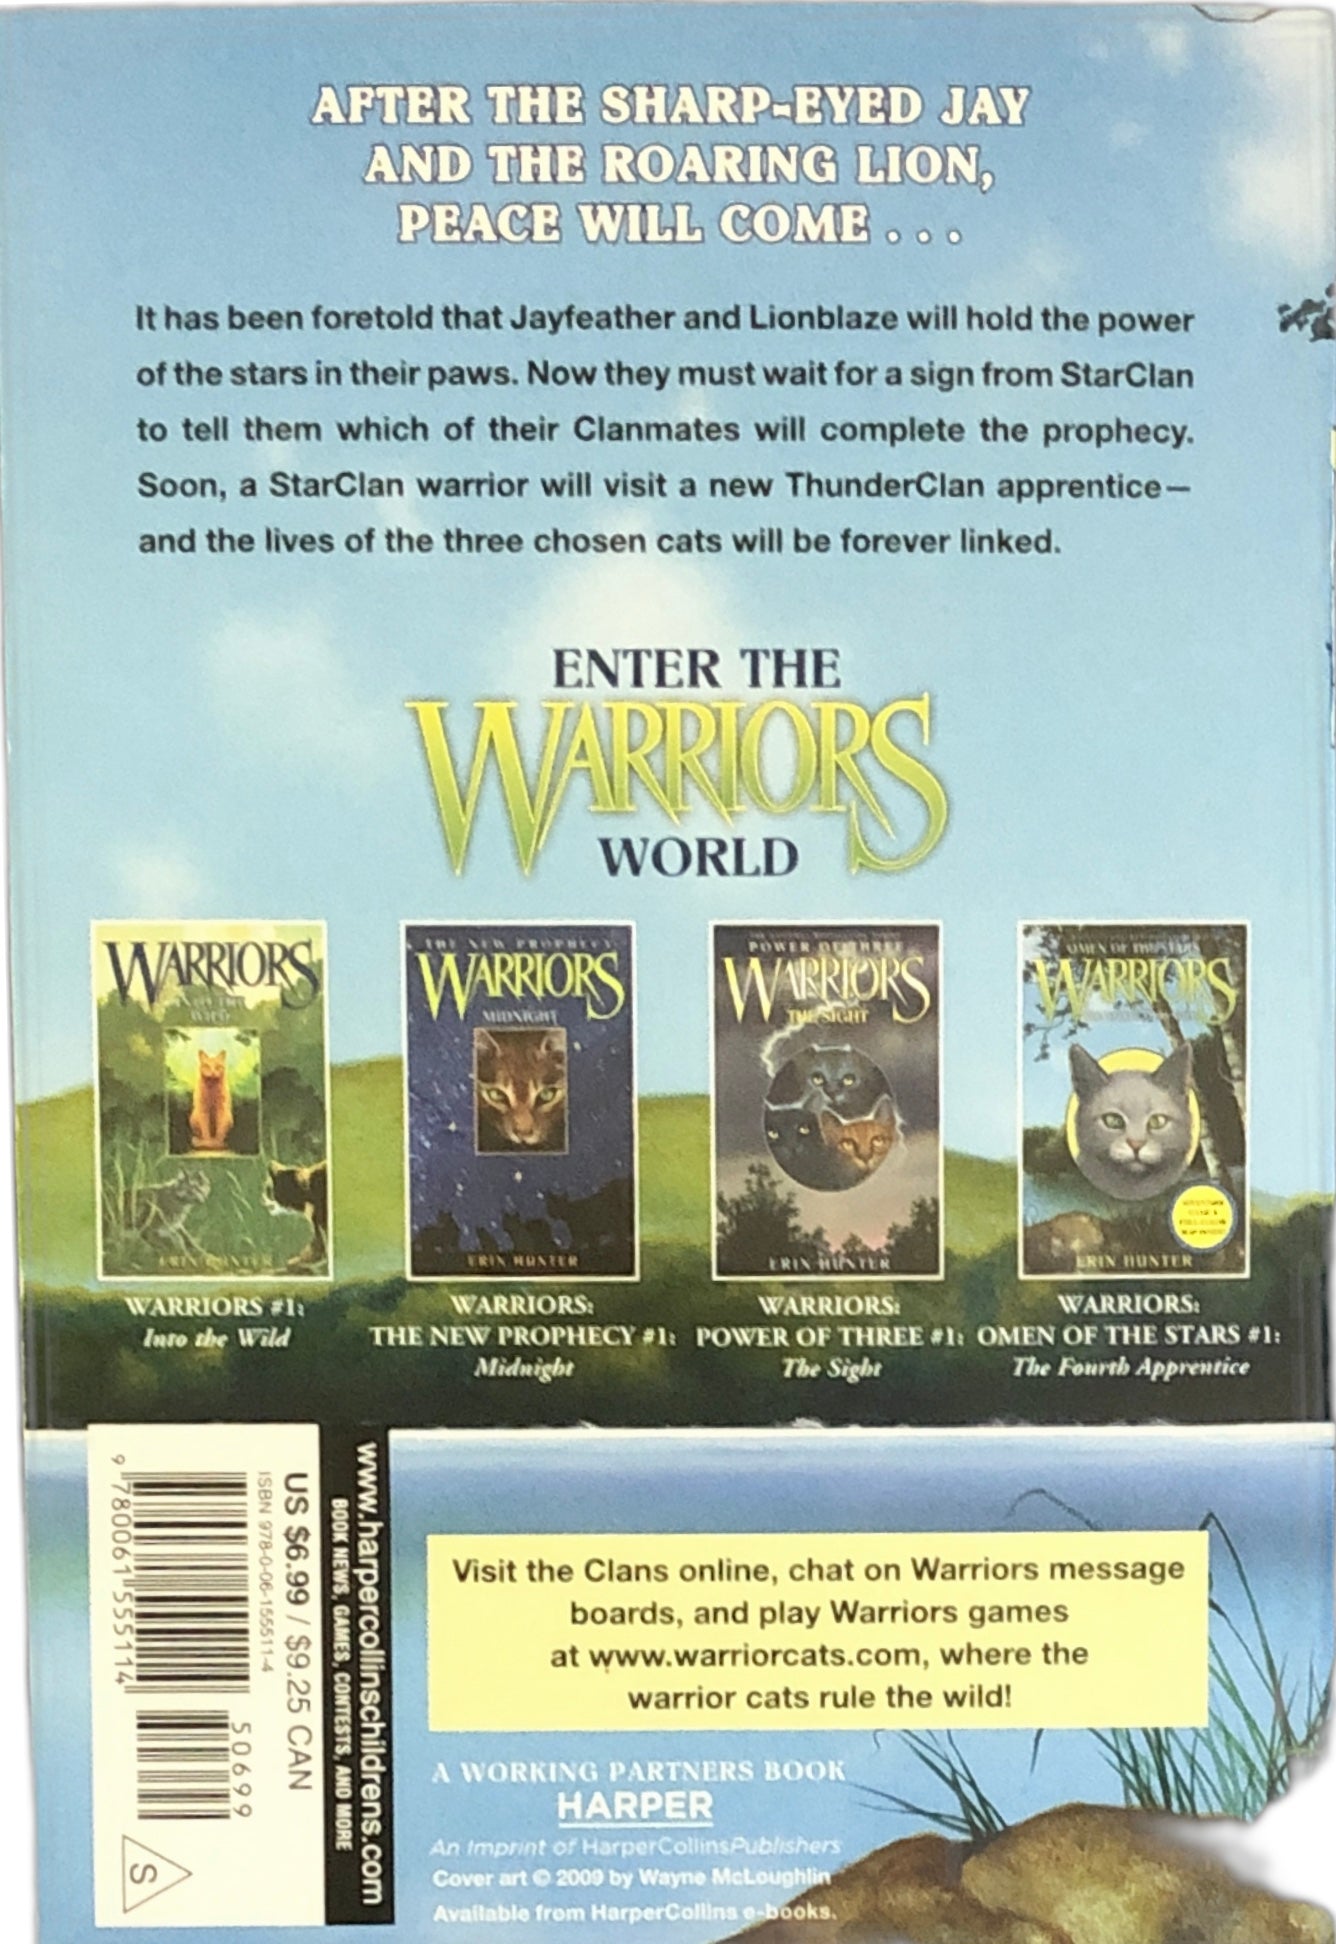 Warriors: The Fourth Apprentice (Omen of the Stars Book #1) by Erin Hunter